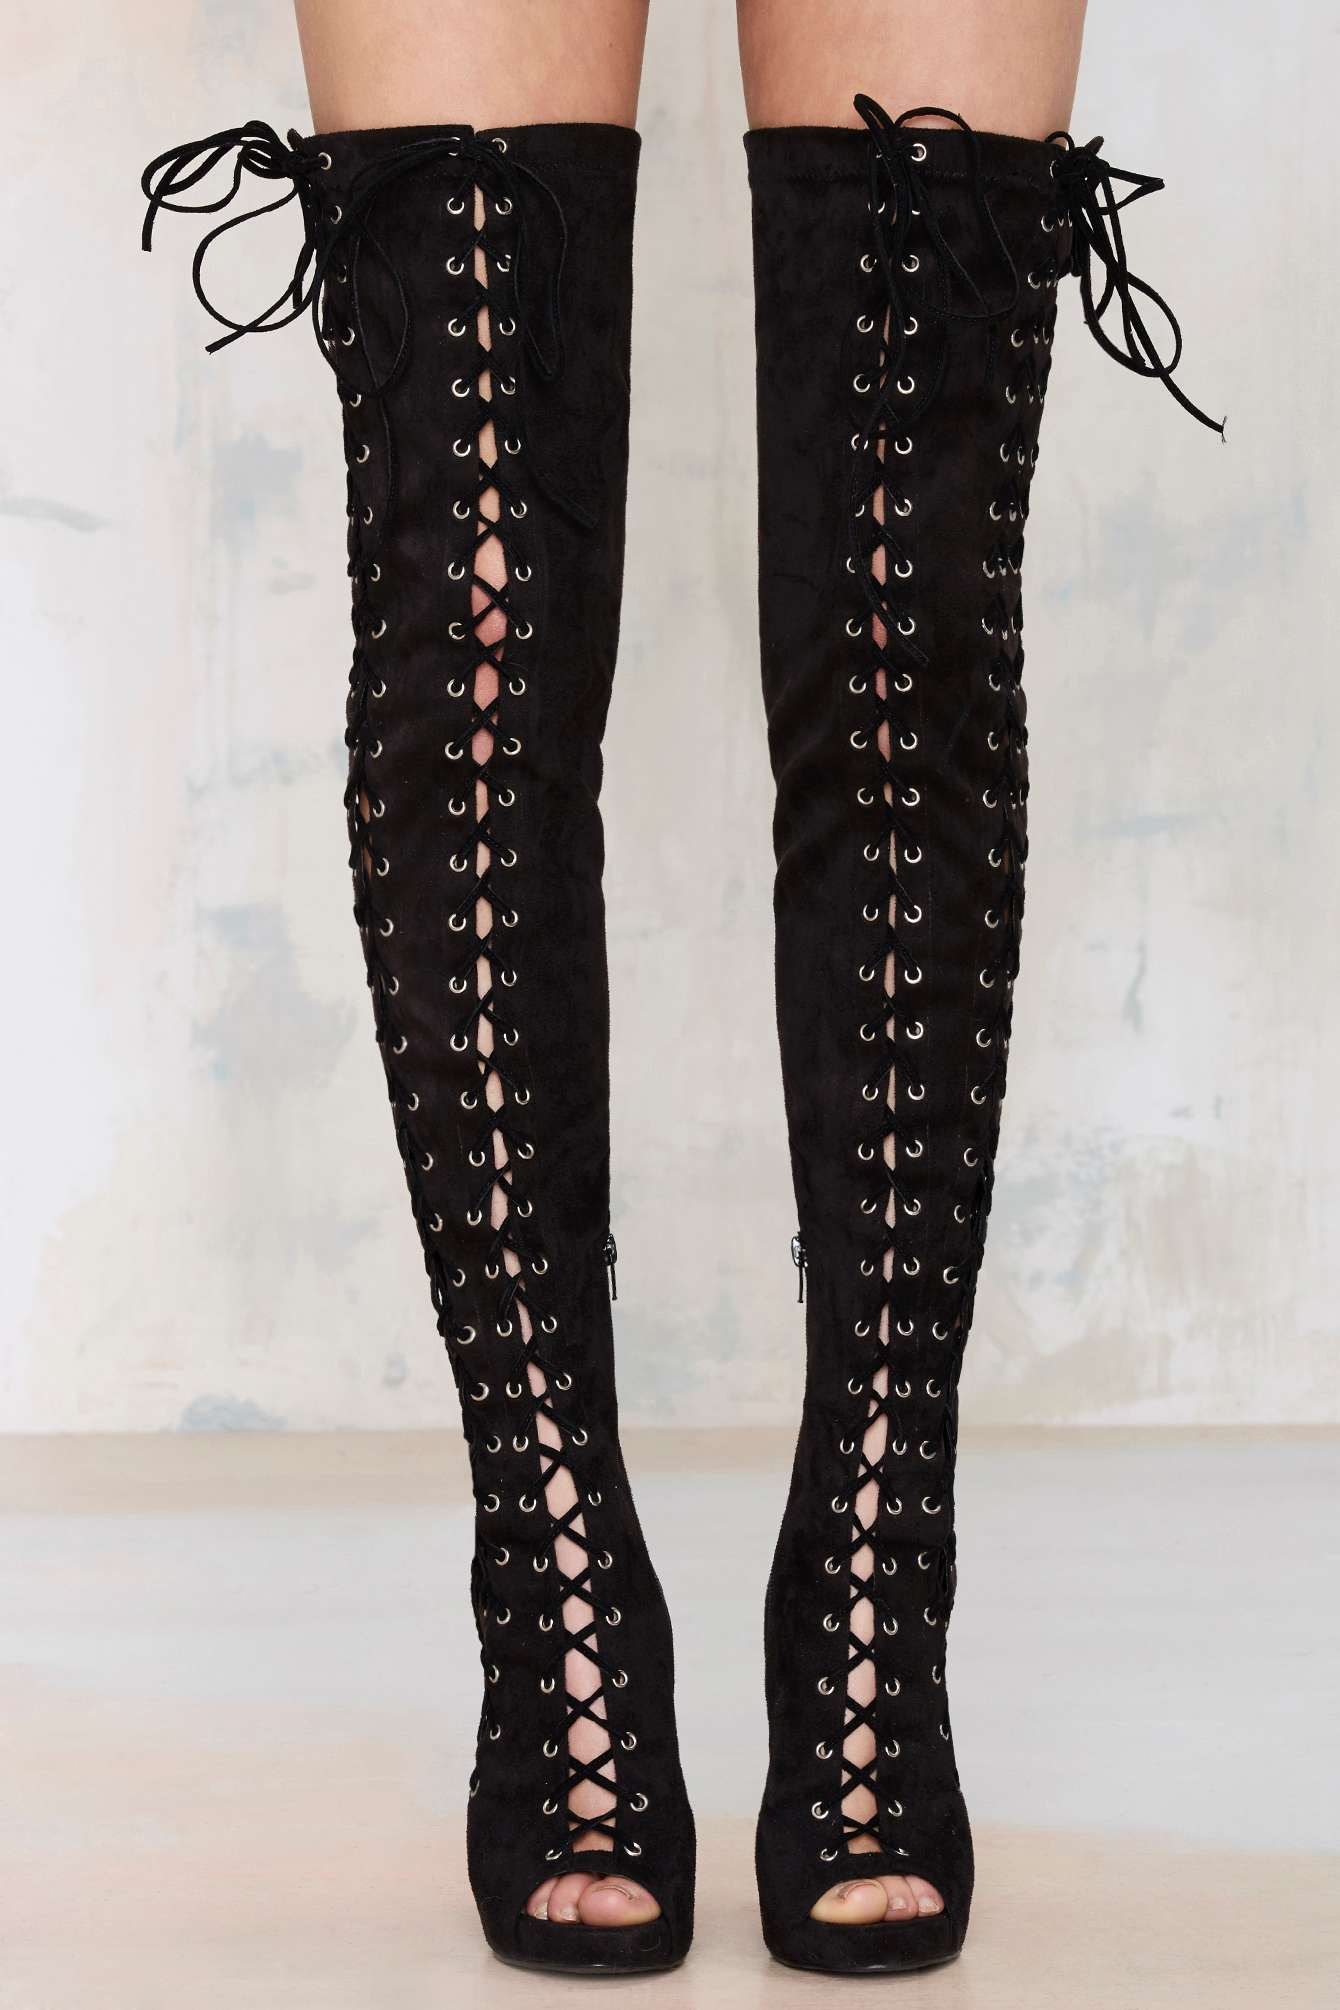 Jeffrey Campbell Tabanca Suede Thigh High Boot in Black - Lyst